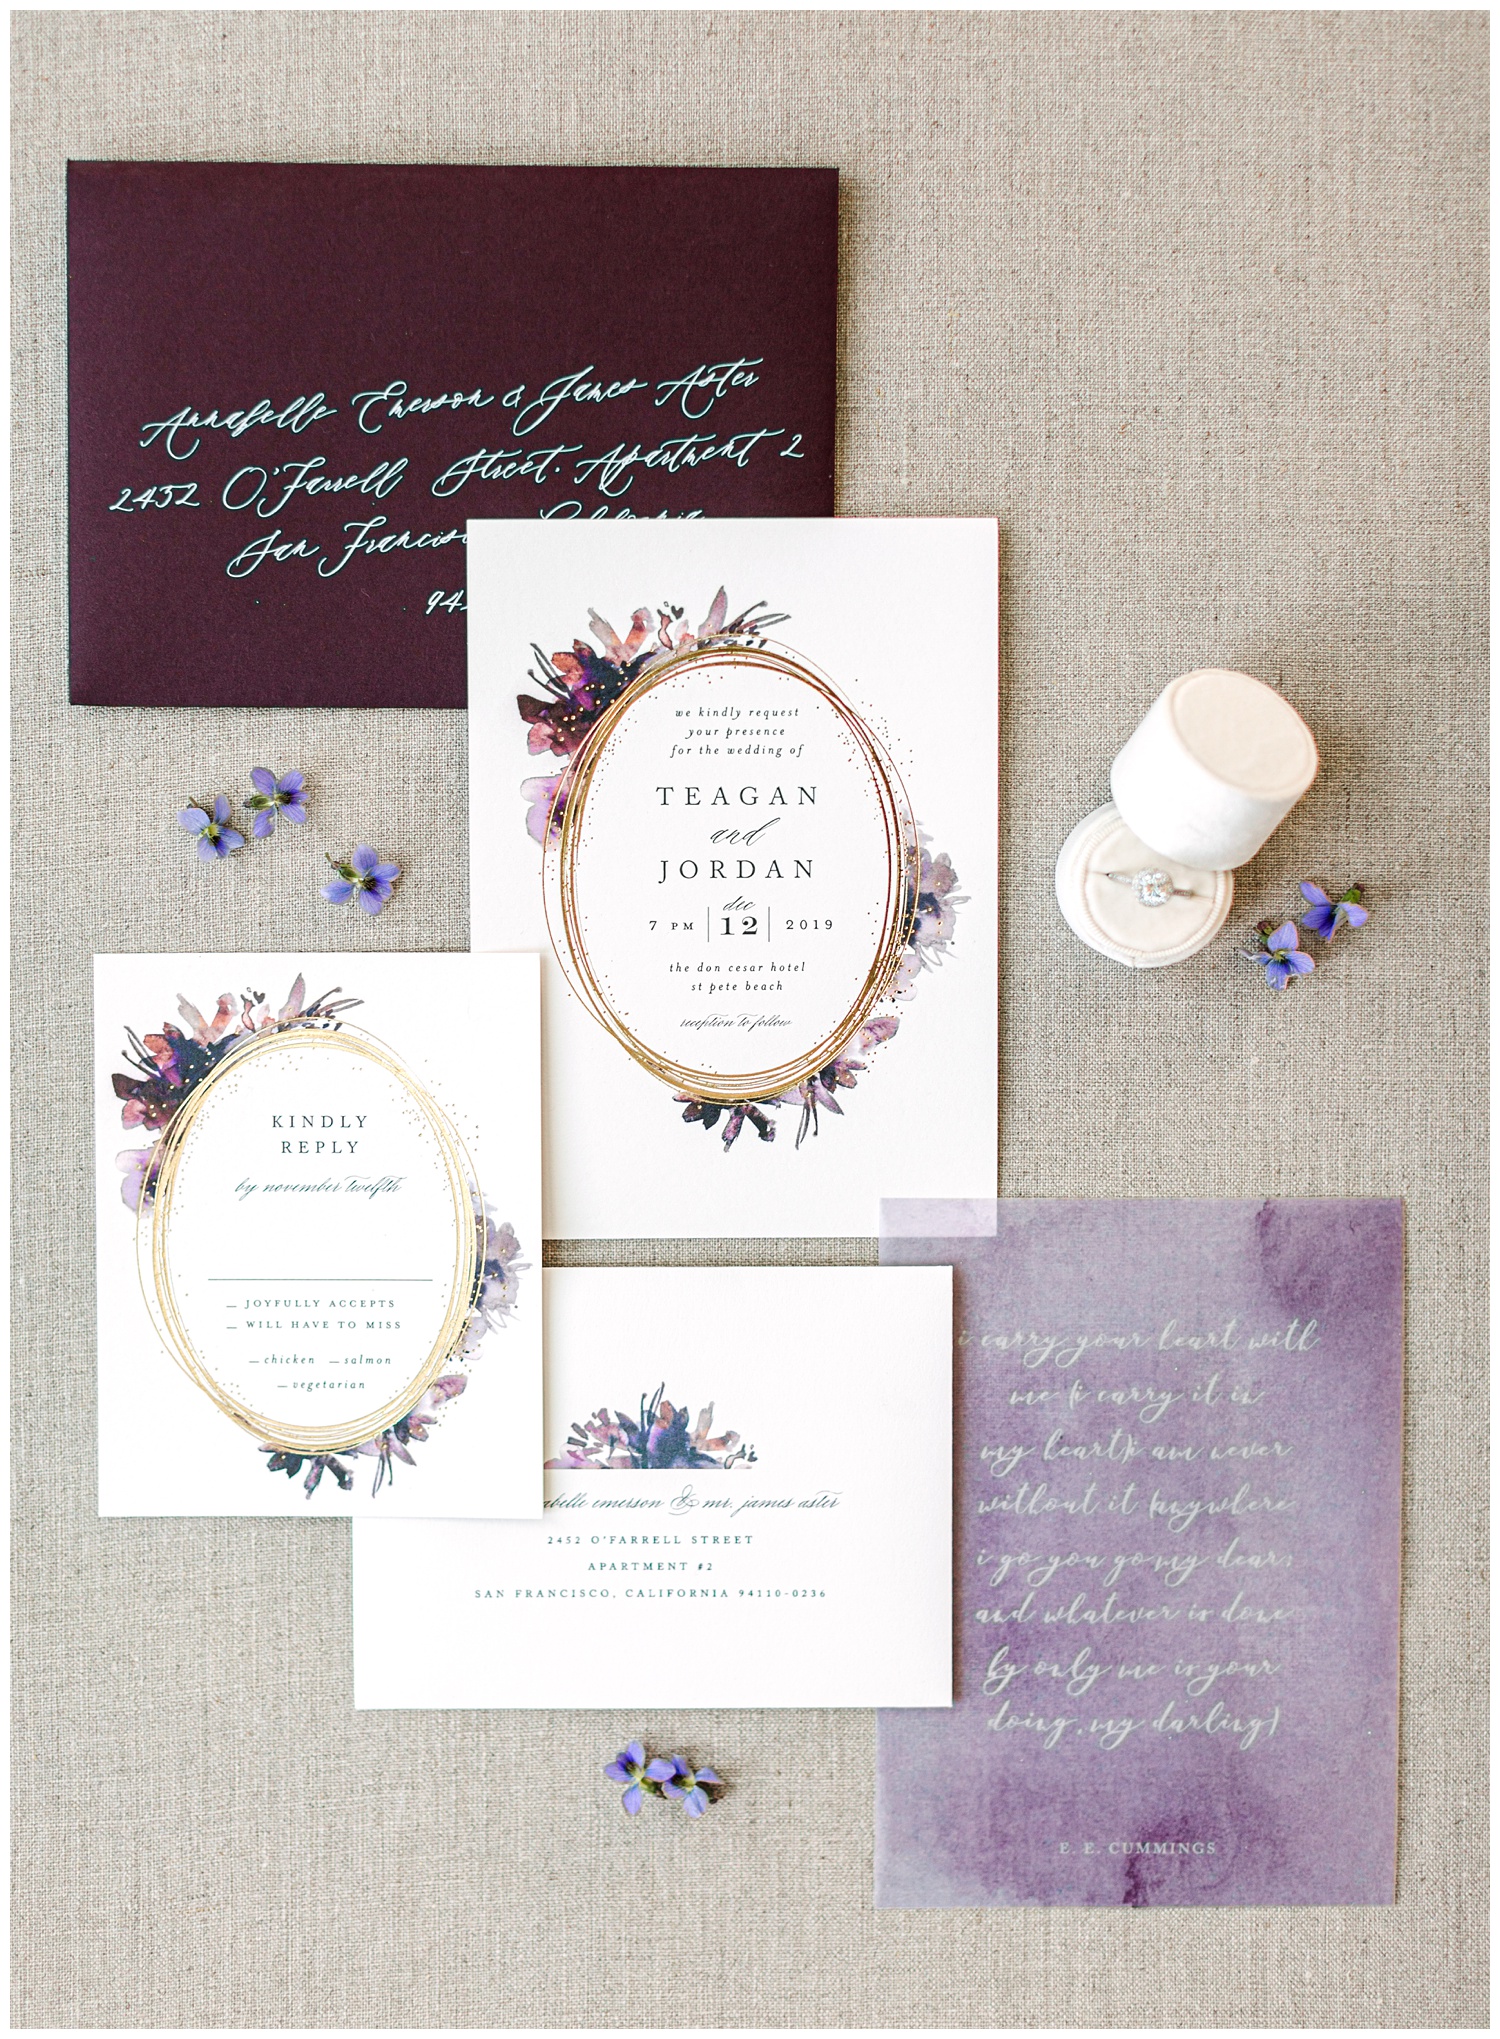 Deep purple and plum watercolor floral wedding invitation suite from Minted complete with gold foil and vellum overlay beautifully styled with purple florals and a cream ring box.